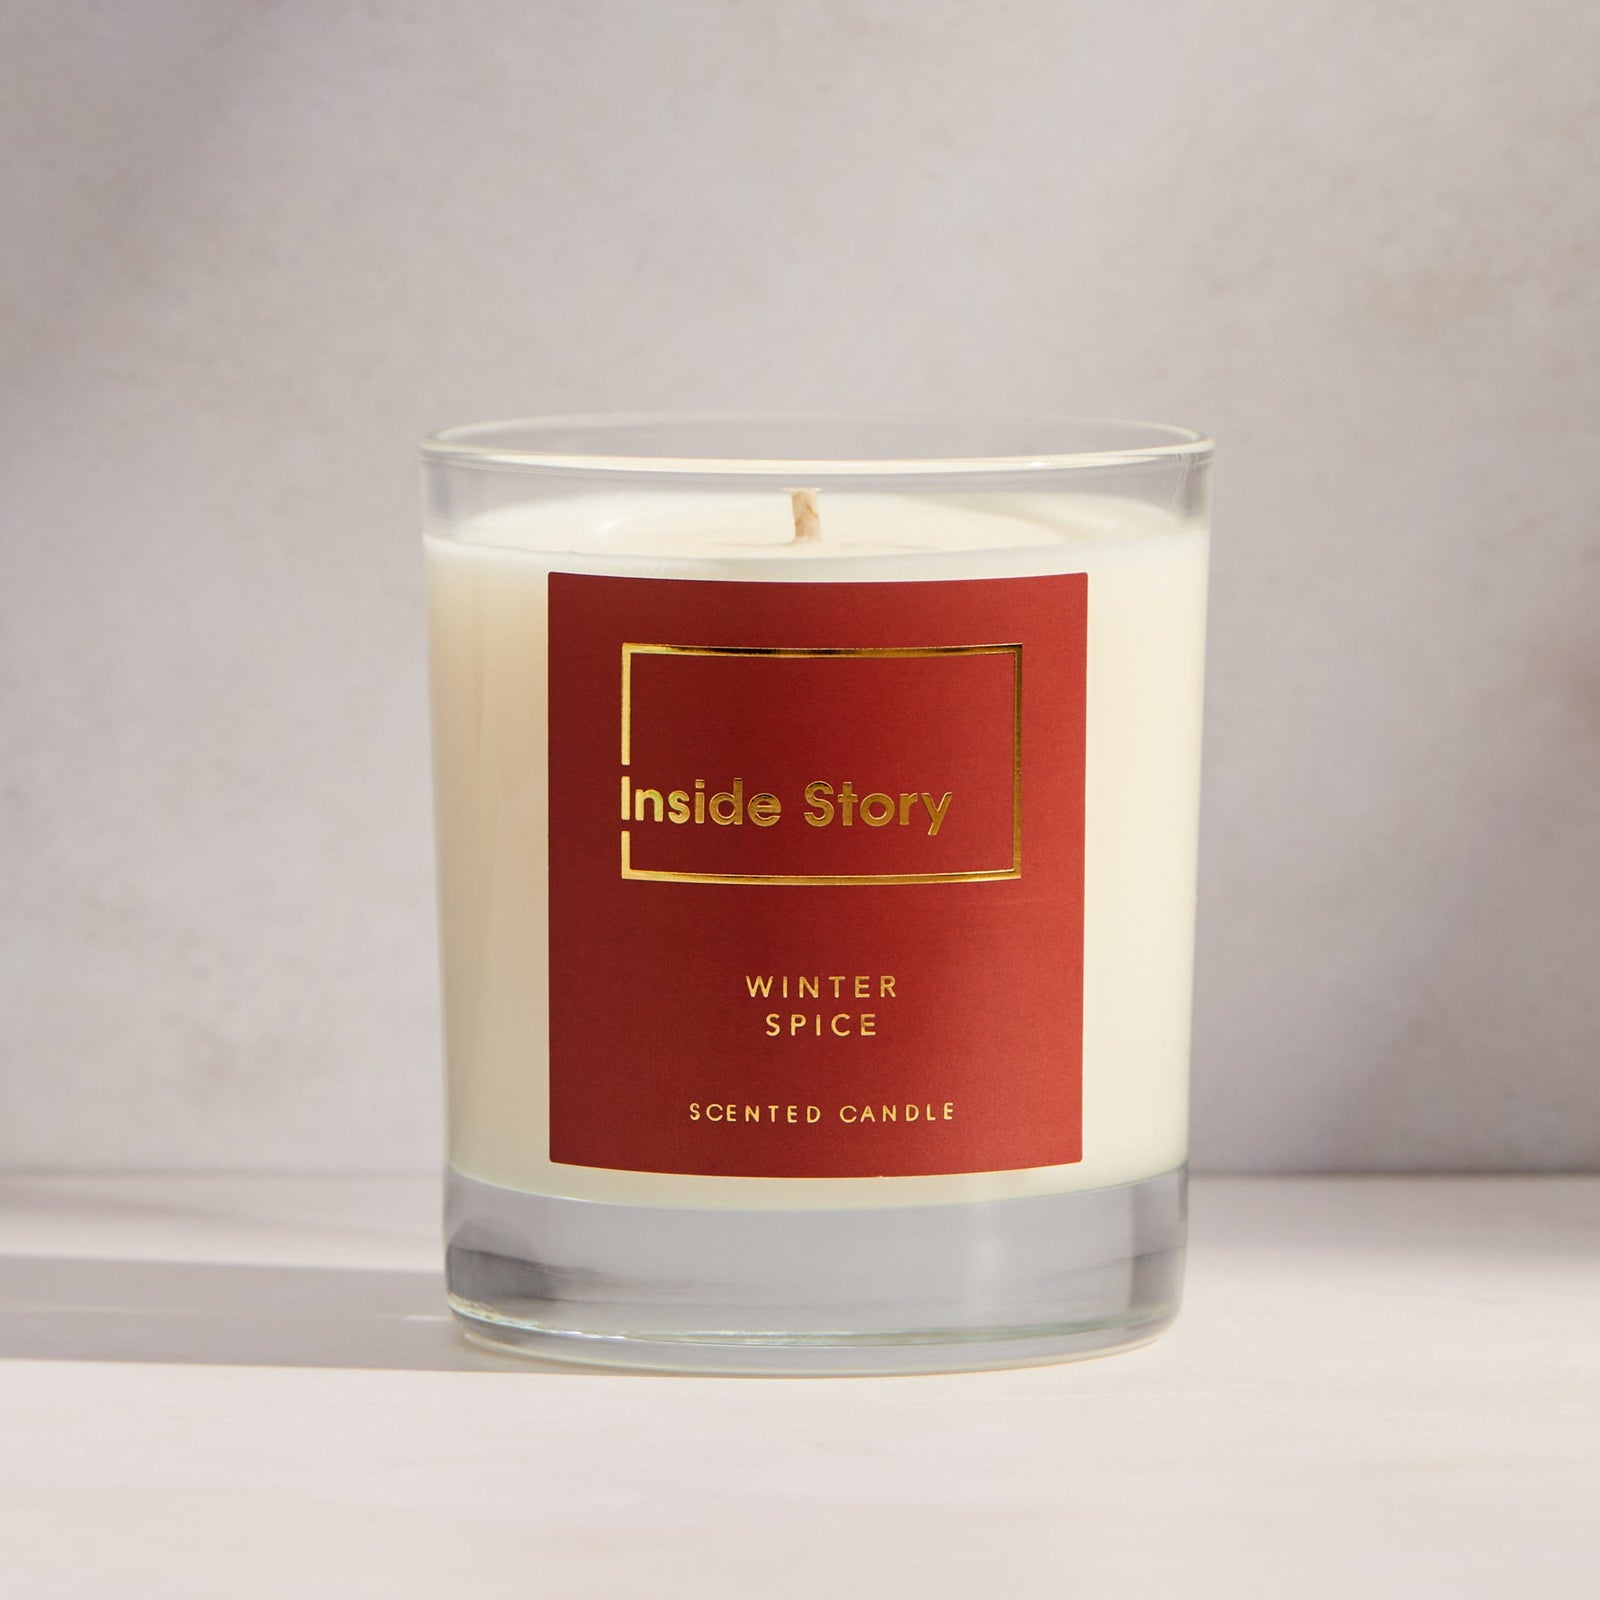 Inside Story Winter Spice Scented Signature Candle 300g